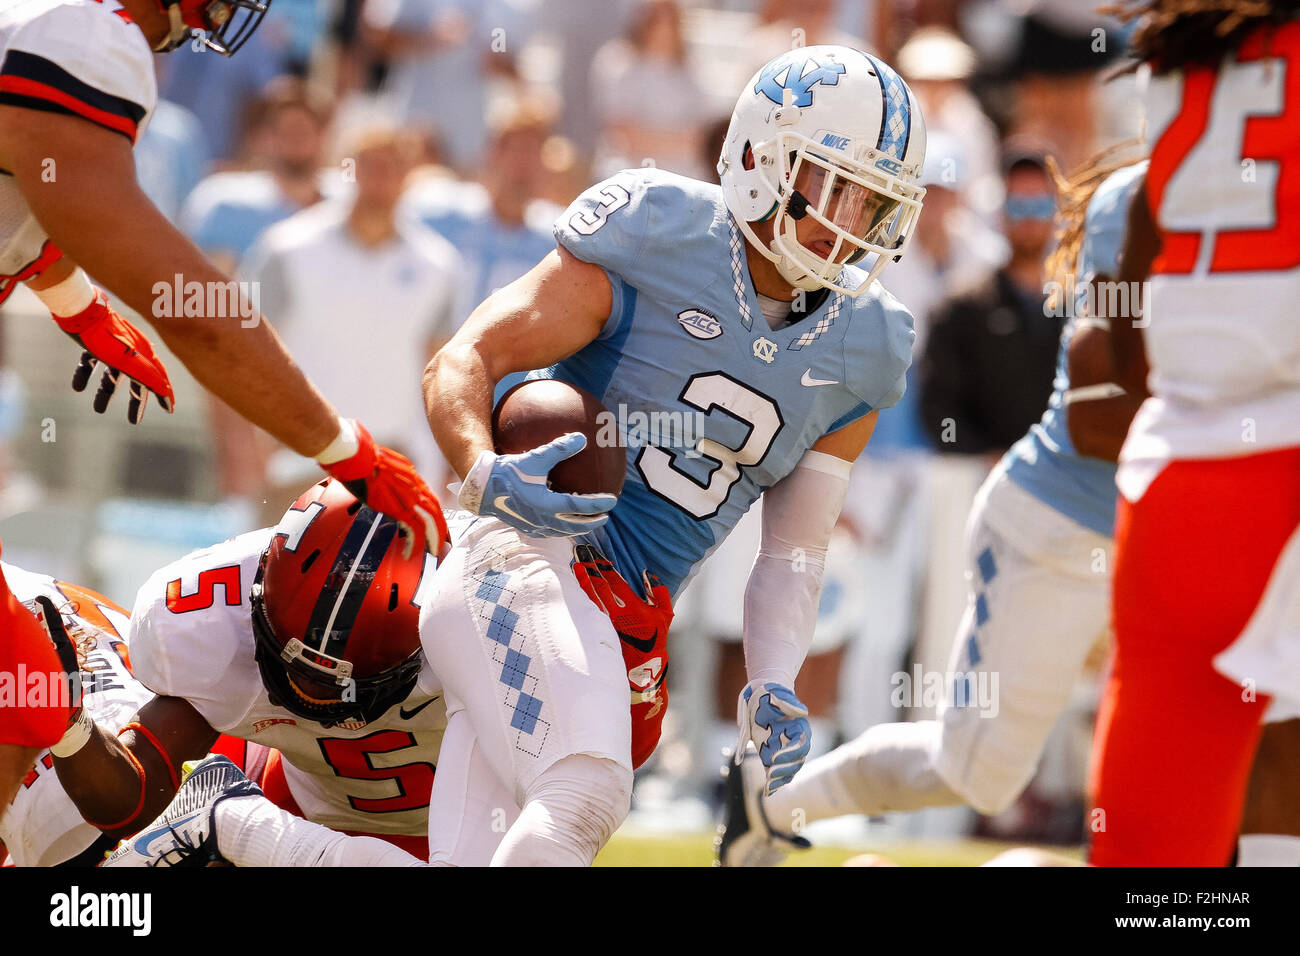 Chapel Hill, NC, USA. 19th Sep, 2015. Ryan Switzer (3) of the North Carolina Tar Heels gets tied up on this punt return by James Crawford (5) of the Illinois Fighting Illini in the NCAA football matchup between the Fighting Illini of Illinois and the North Carolina Tarheels at Kenan Memorial Stadium in Chapel Hill, NC. Scott Kinser/CSM/Alamy Live News Stock Photo